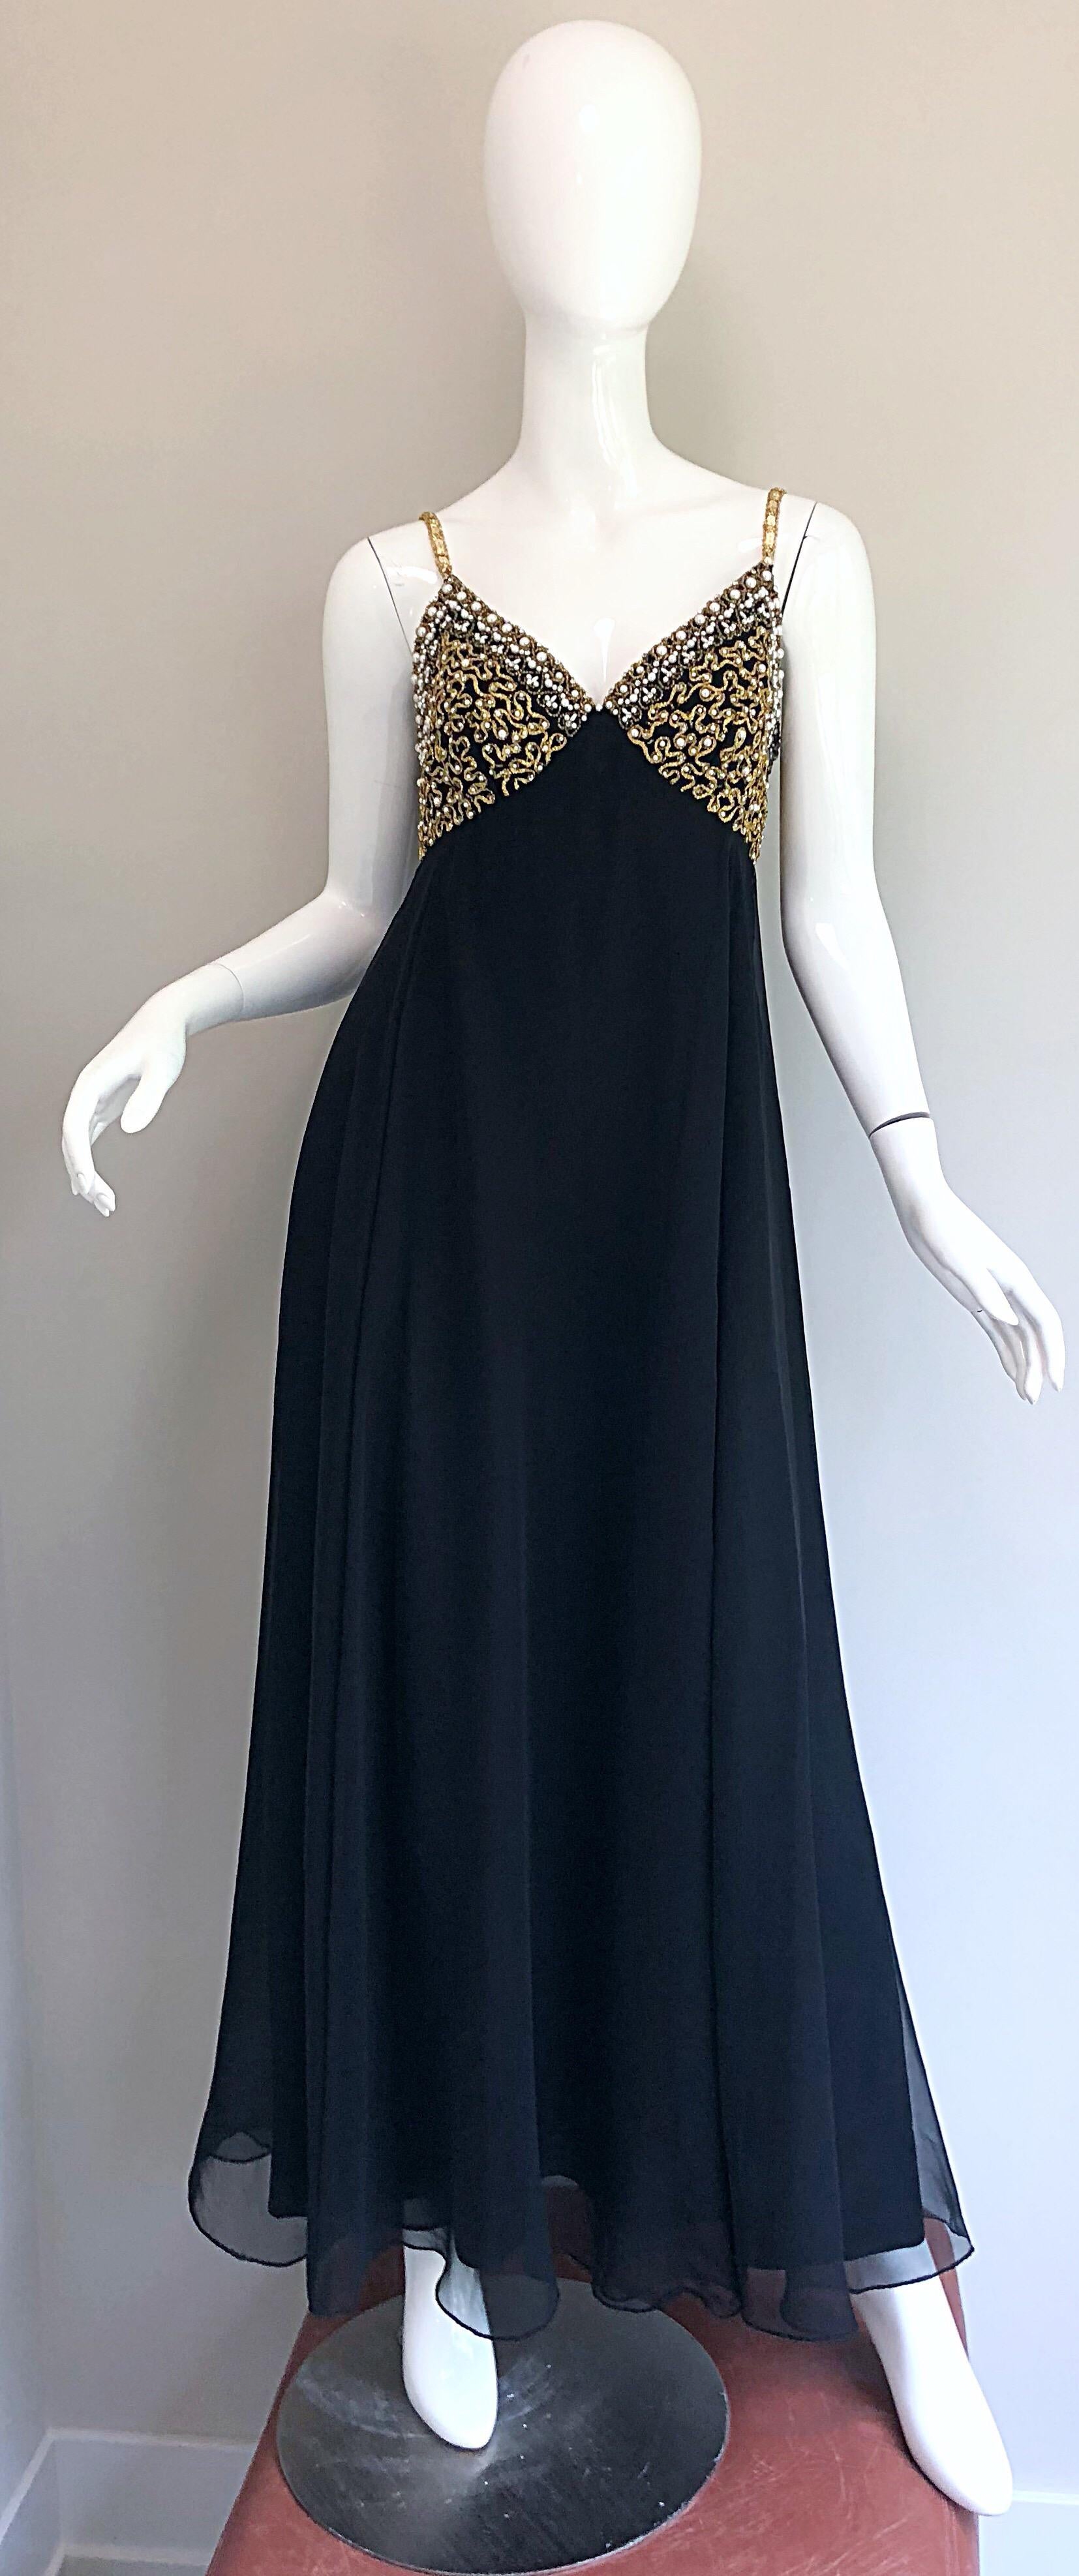 1970s Black + Gold Pearl + Rhinestone Encrusted Vintage 70s Chiffon Evening Gown For Sale 9